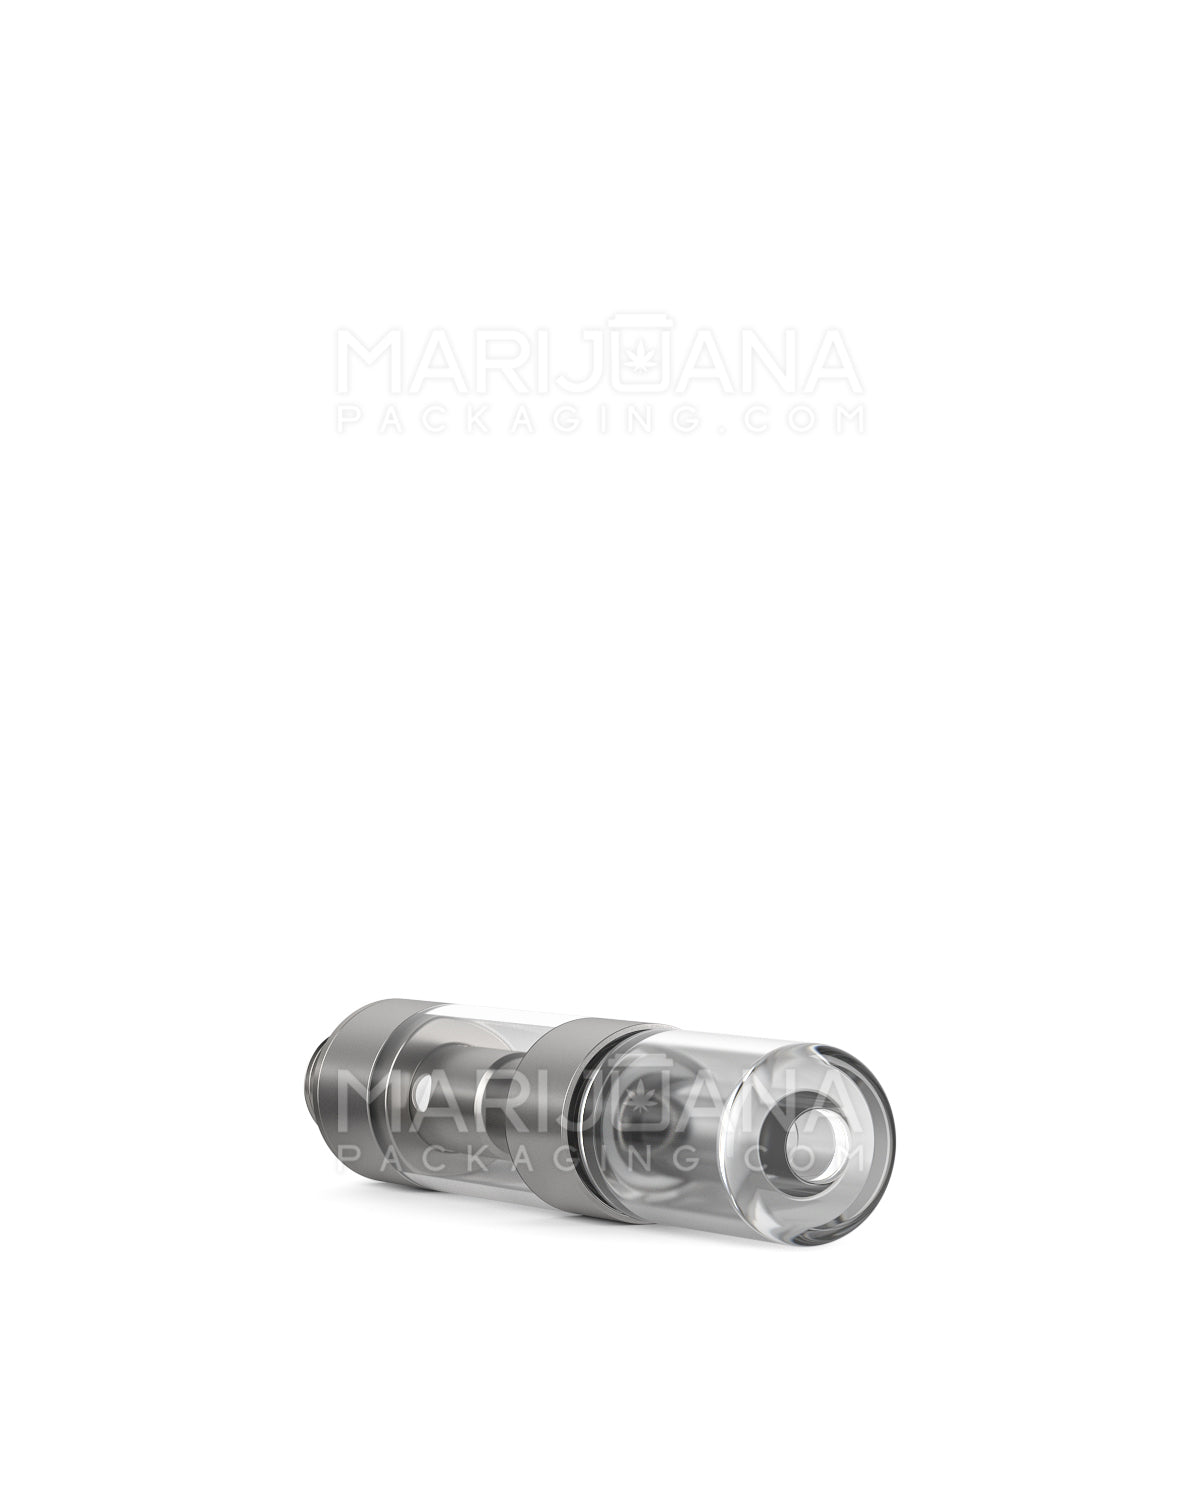 CCELL | Liquid6 Reactor Plastic Vape Cartridge with Barrel Clear Plastic Mouthpiece | 0.5mL - Press On - 100 Count - 6